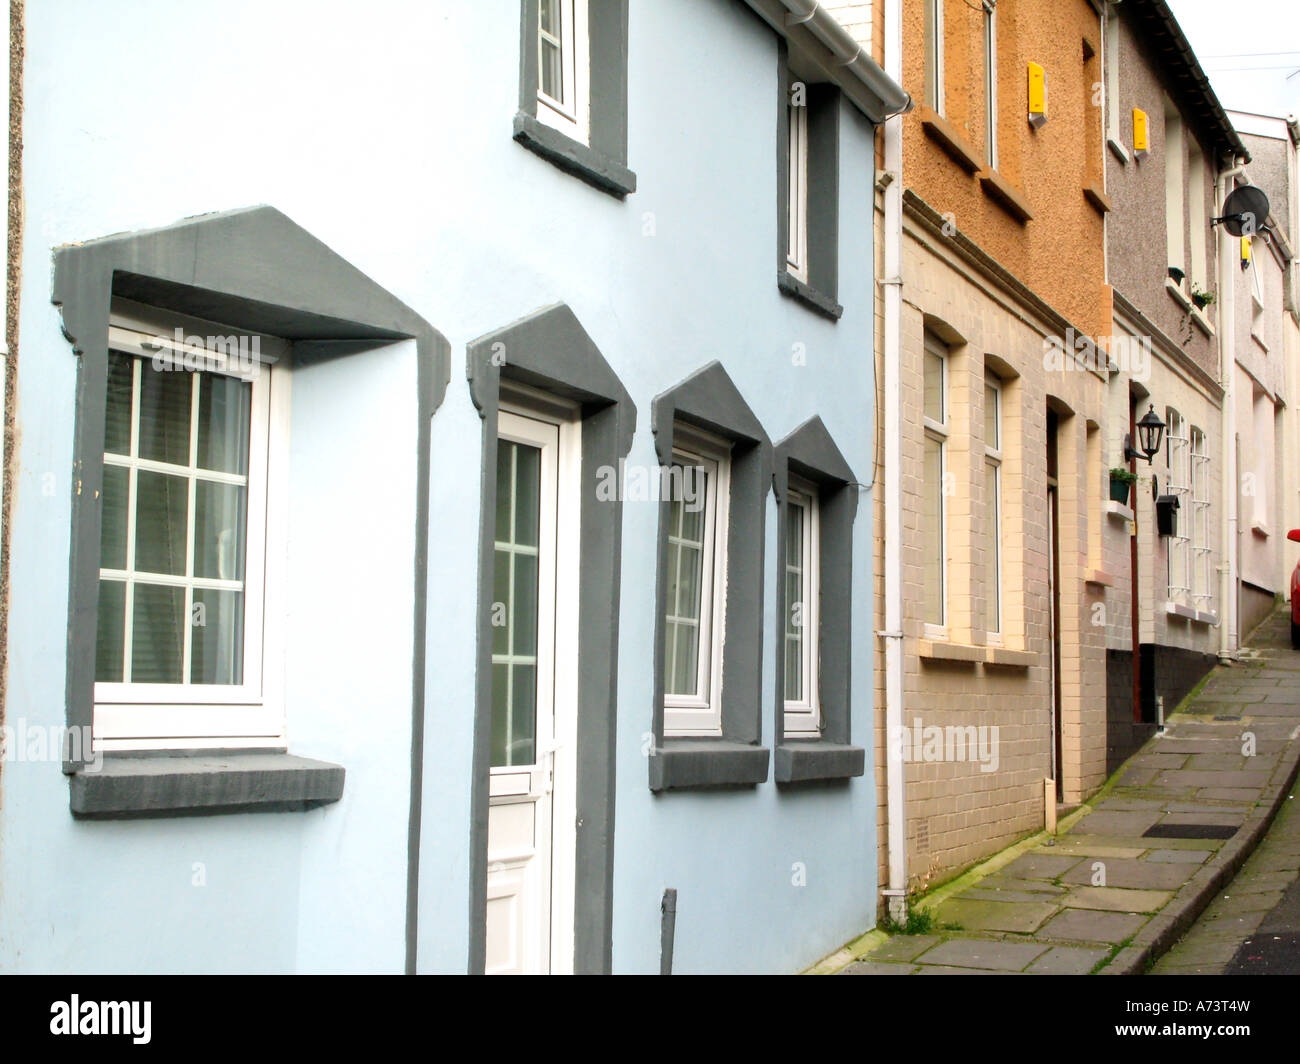 Traditional terraced houses dating from late 19th century in town centre of Merthyr Tydfil South Wales UK Stock Photo